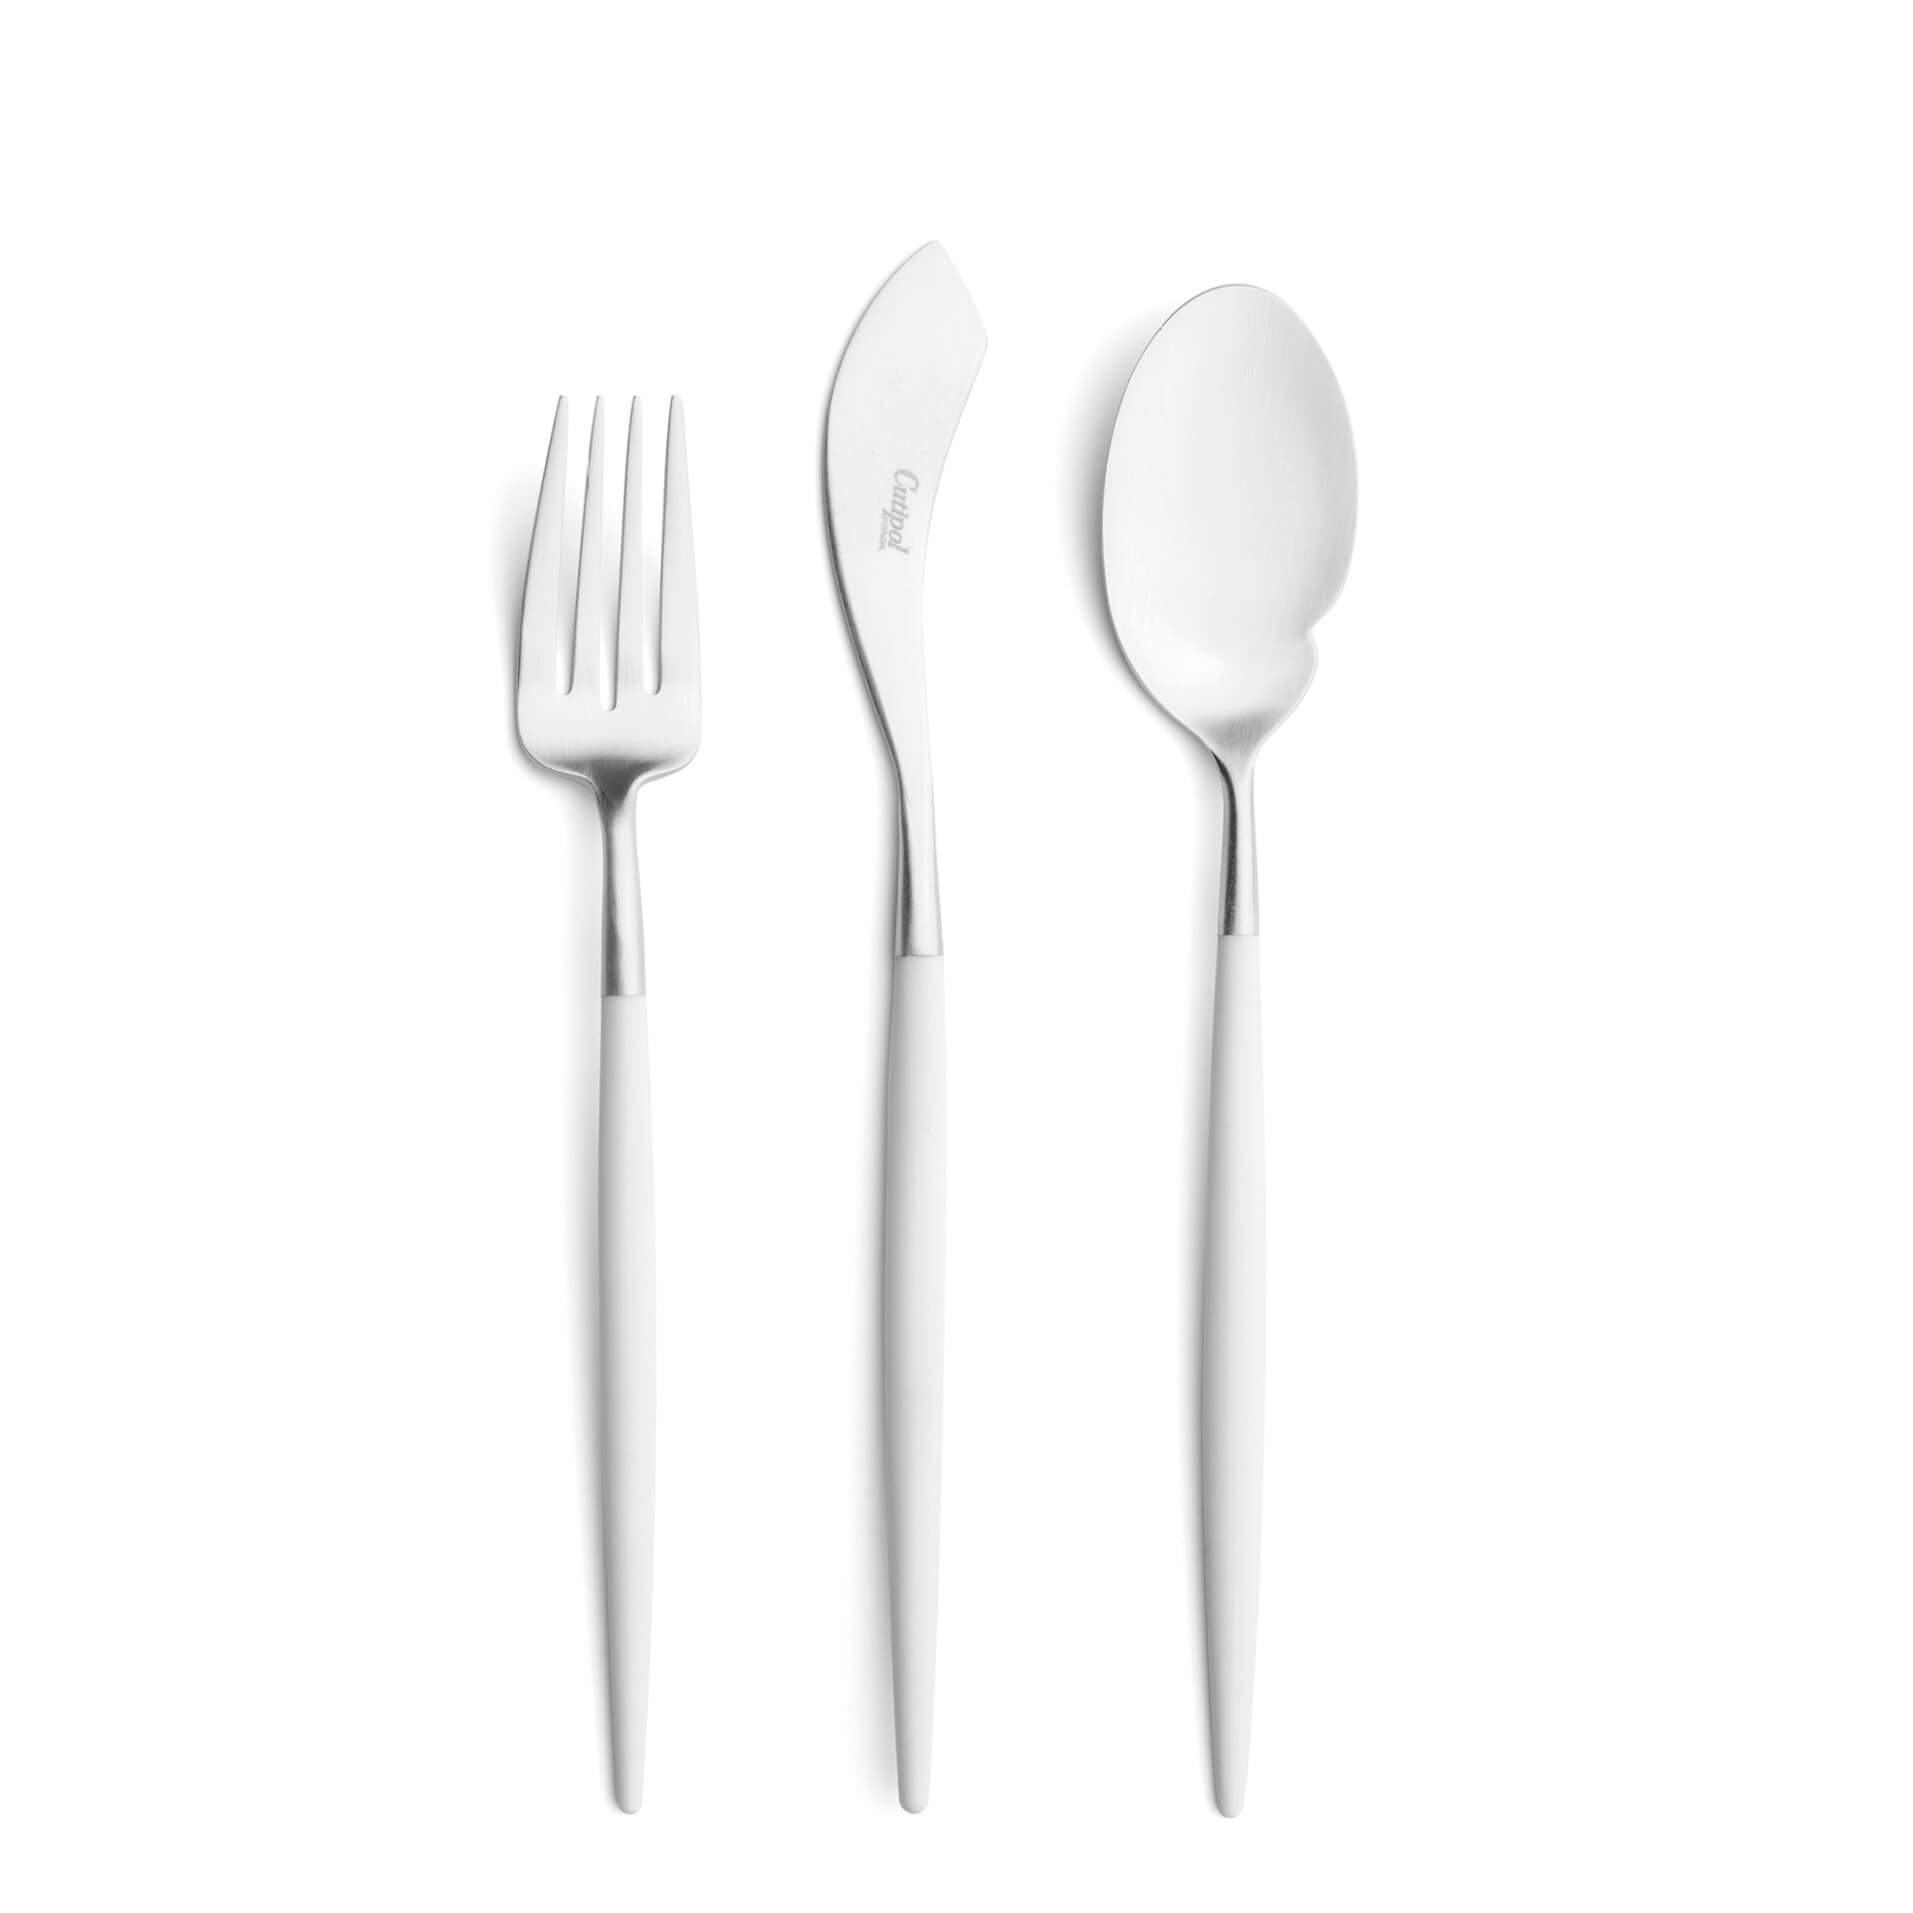 Cutipol Cutlery Goa White with fish fork, fish knife and gourmet spoon